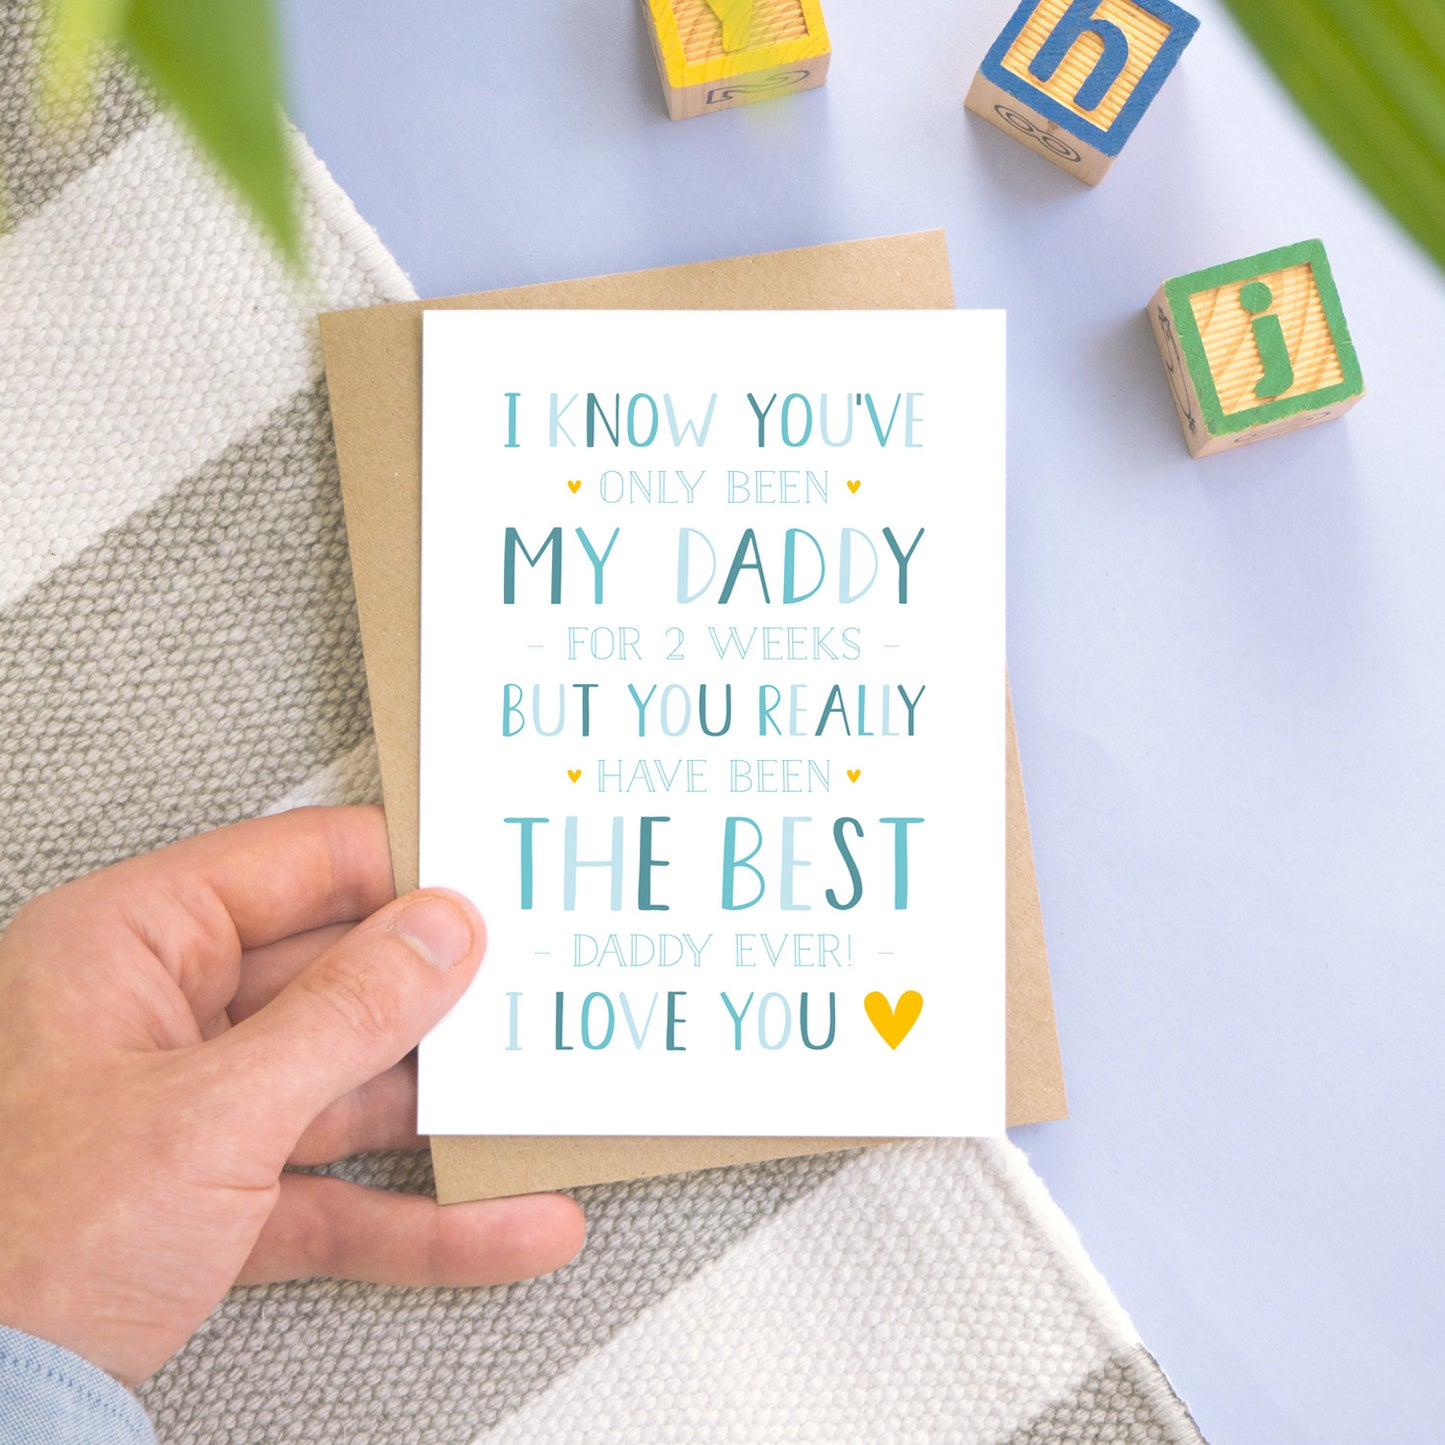 A personalised new daddy card photographed on a blue and grey stripy background with a few leaves, and wooden building blocks. The card is being held by a father and features typography in varying tones of blue and with a pop of yellow.